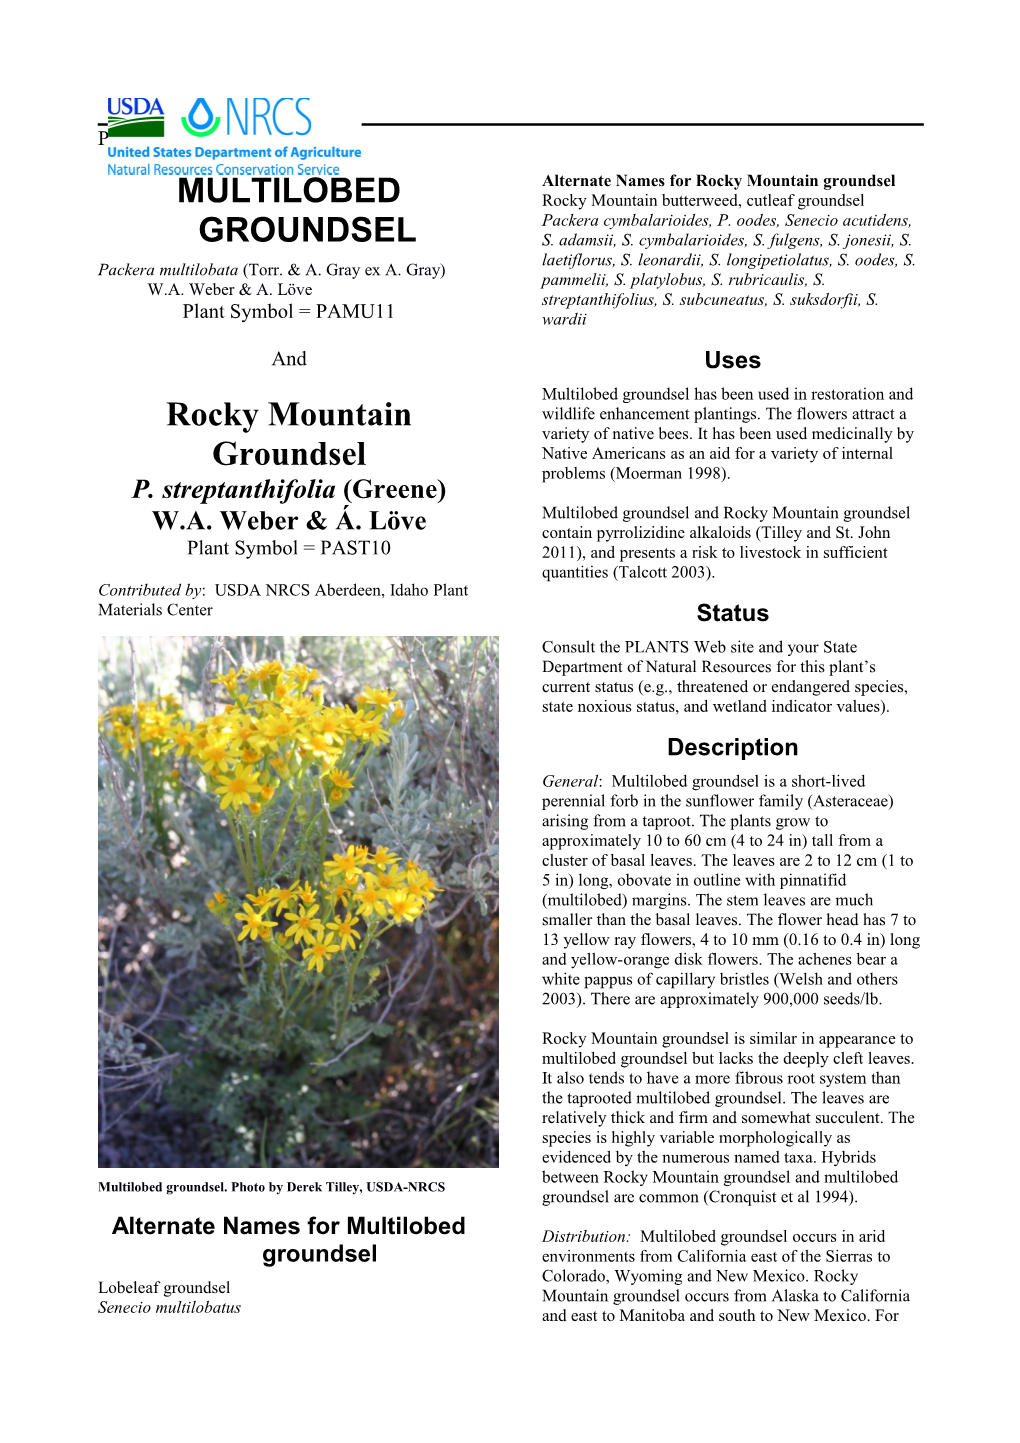 Plant Guide for Multilobed Groundsel (Packera Multilobata) and Rocky Mountain Groundsel